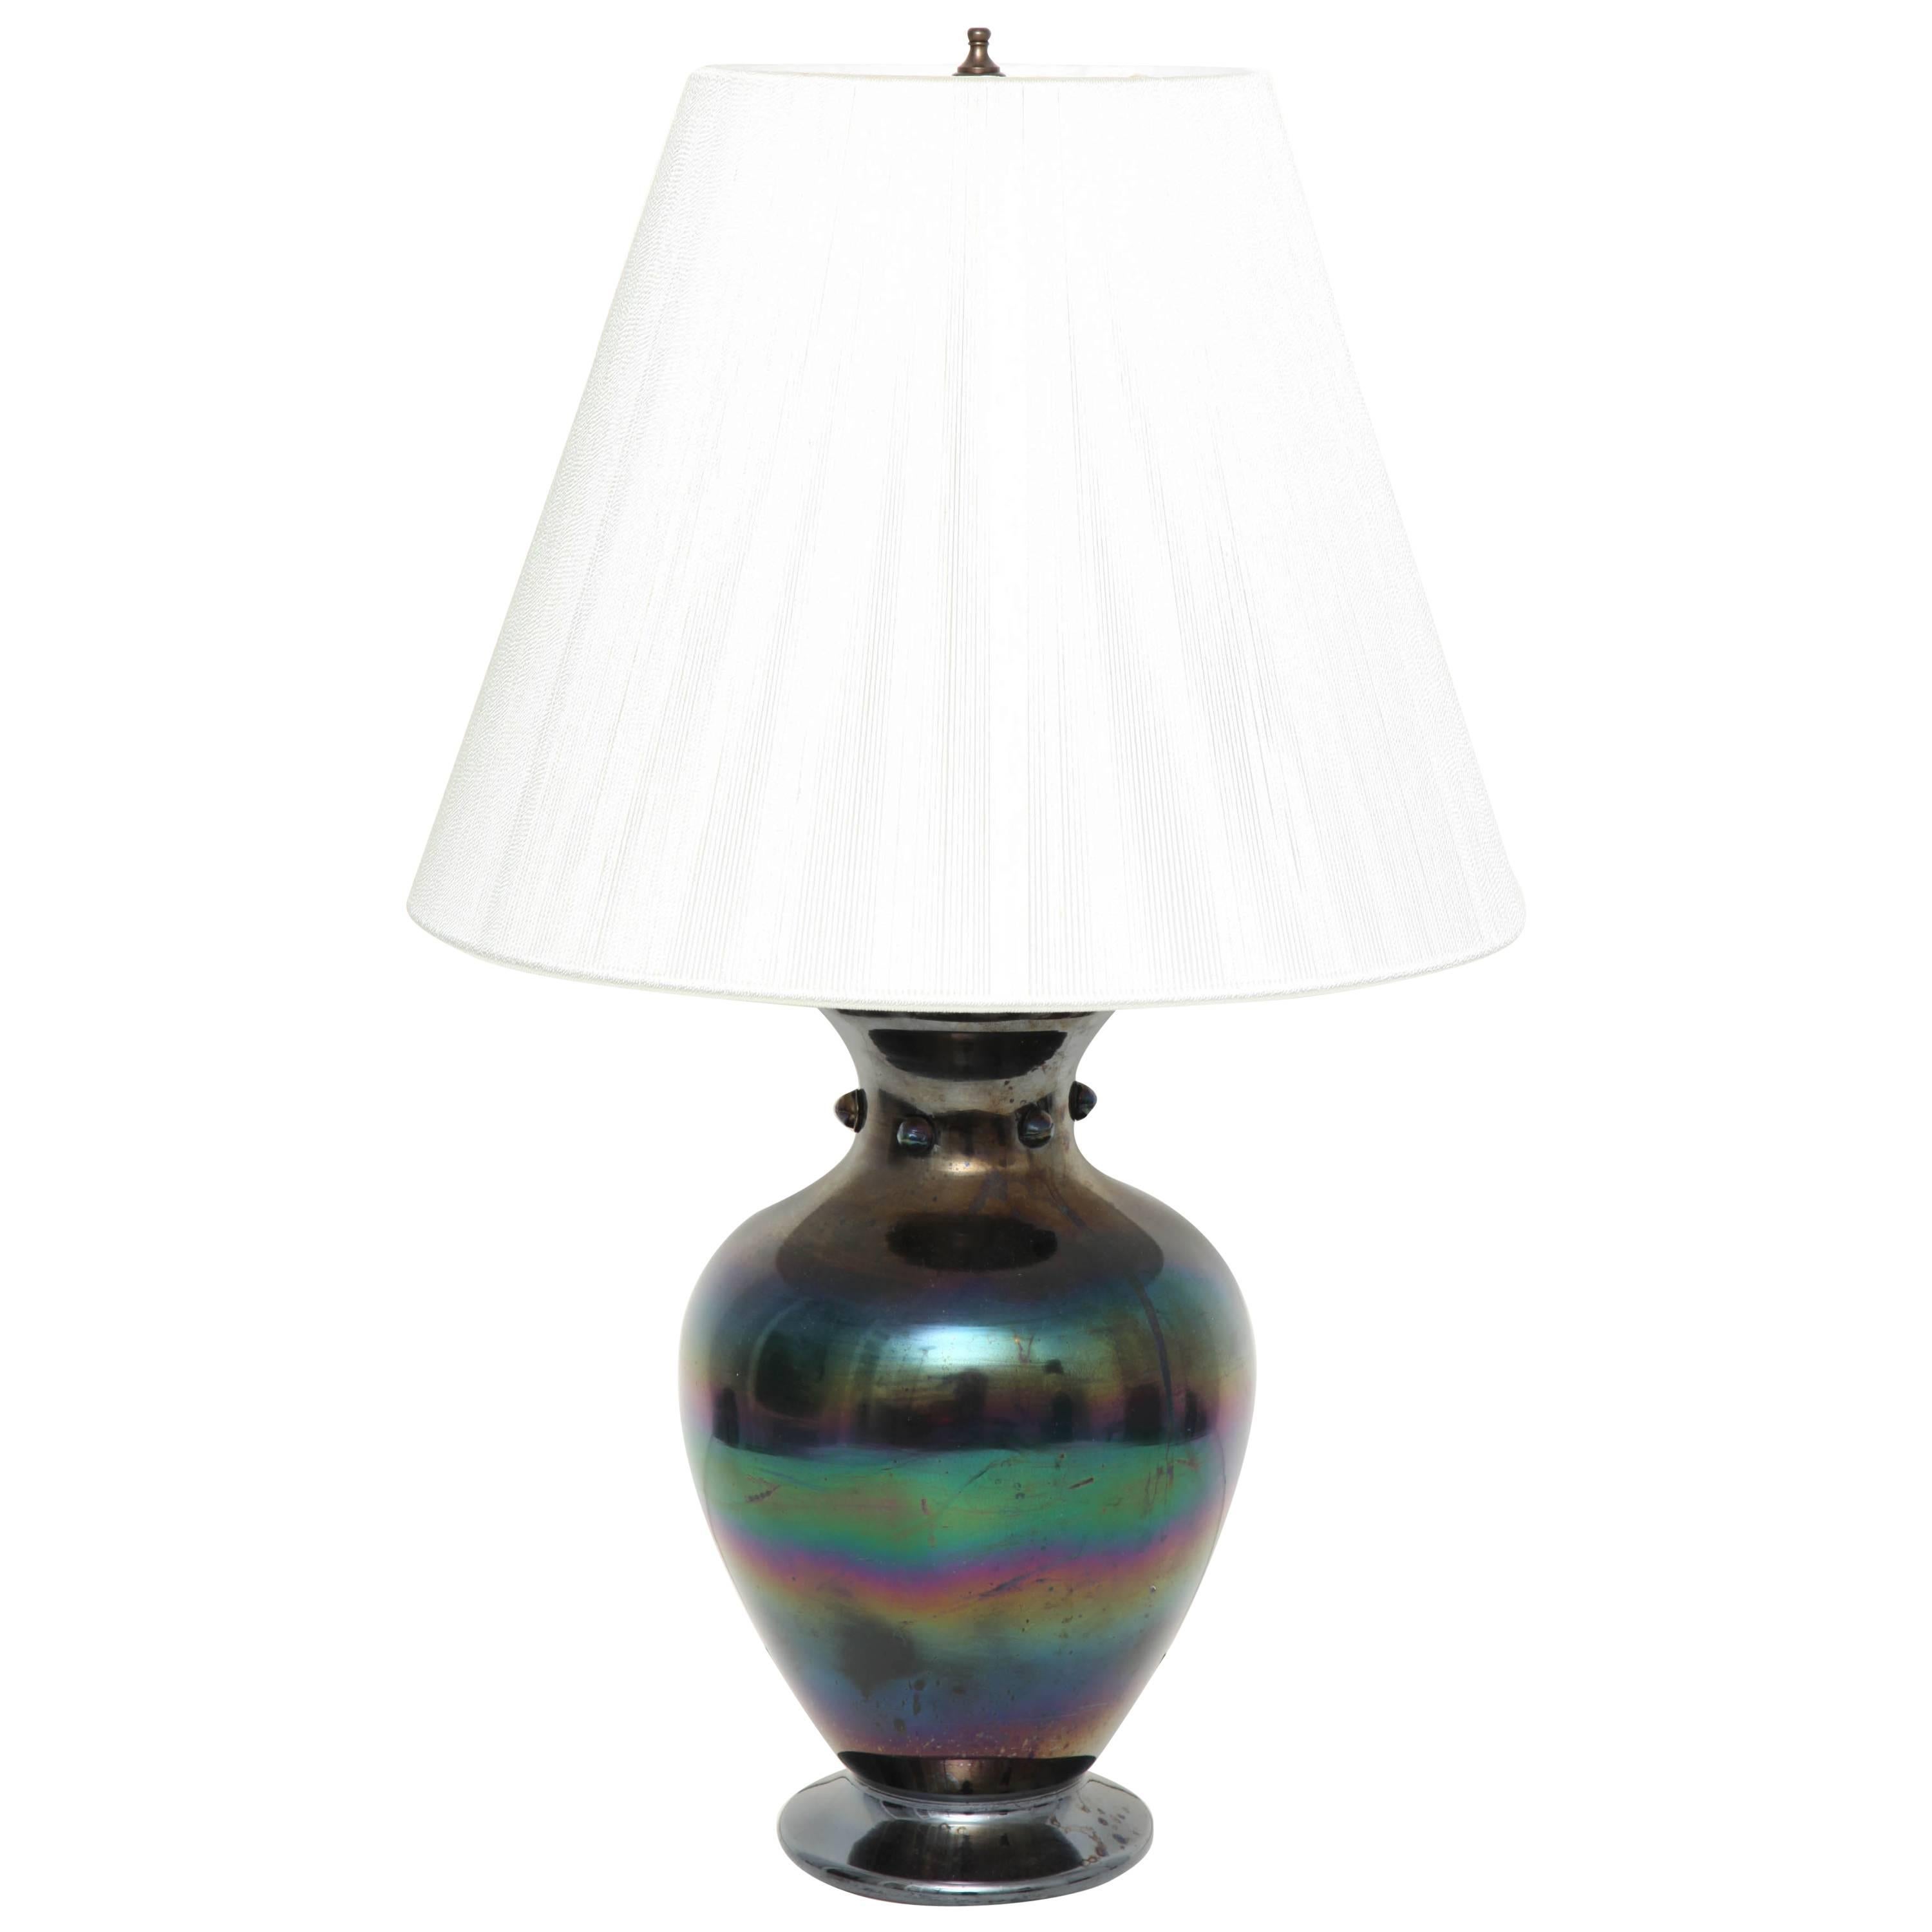 19th Century Iridescent Glass Vase by Thomas Webb, Now Mounted as a Lamp